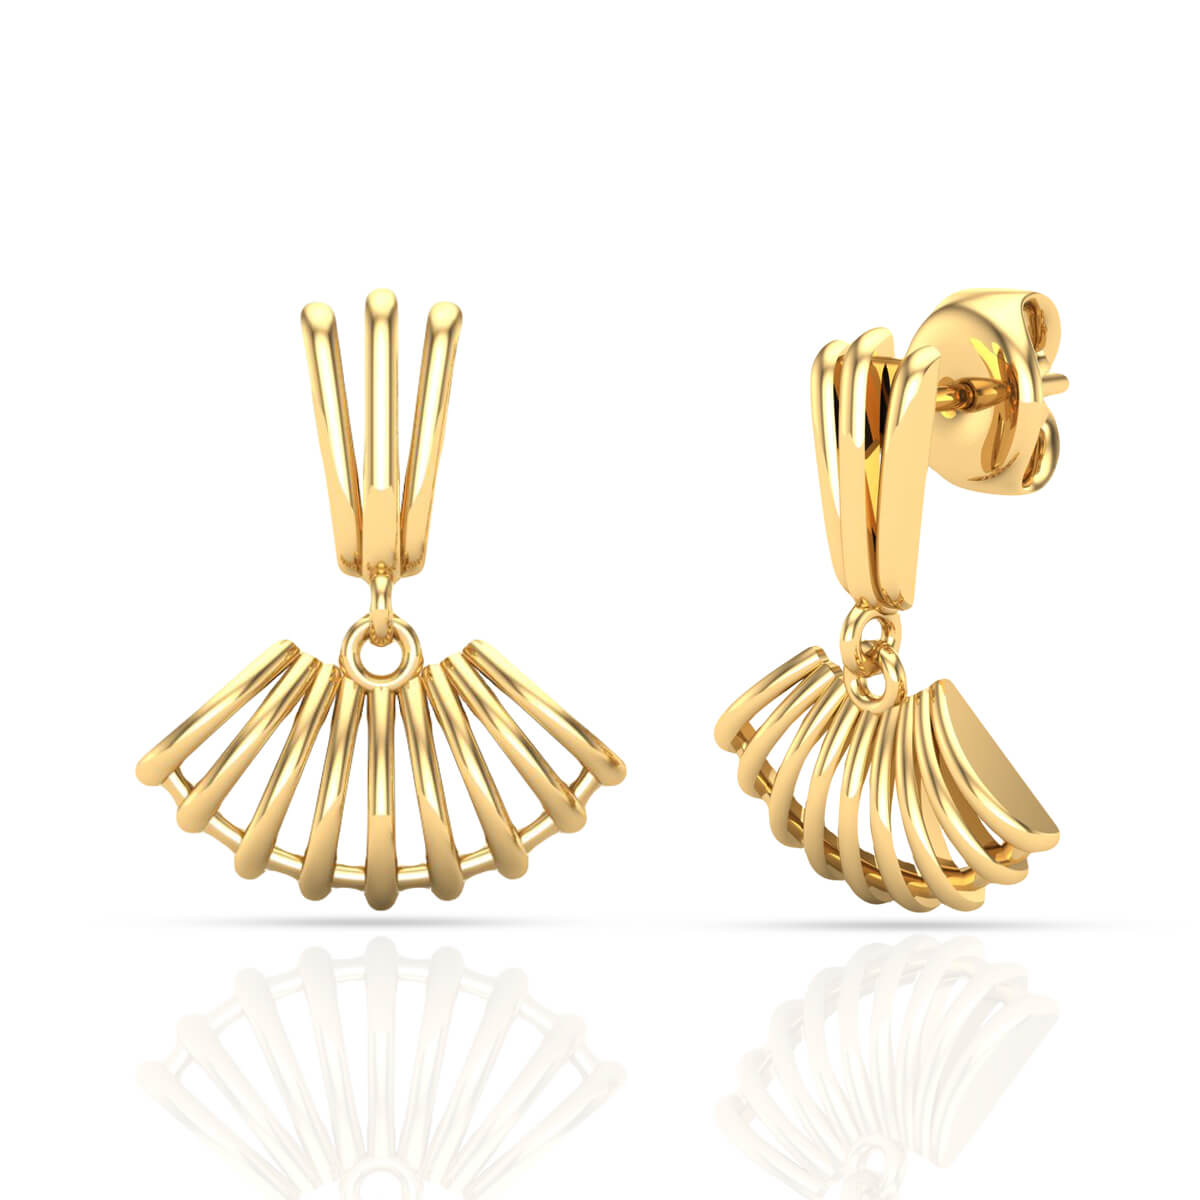 gold Studs with weight and price 2023/new gold earrings with price - YouTube